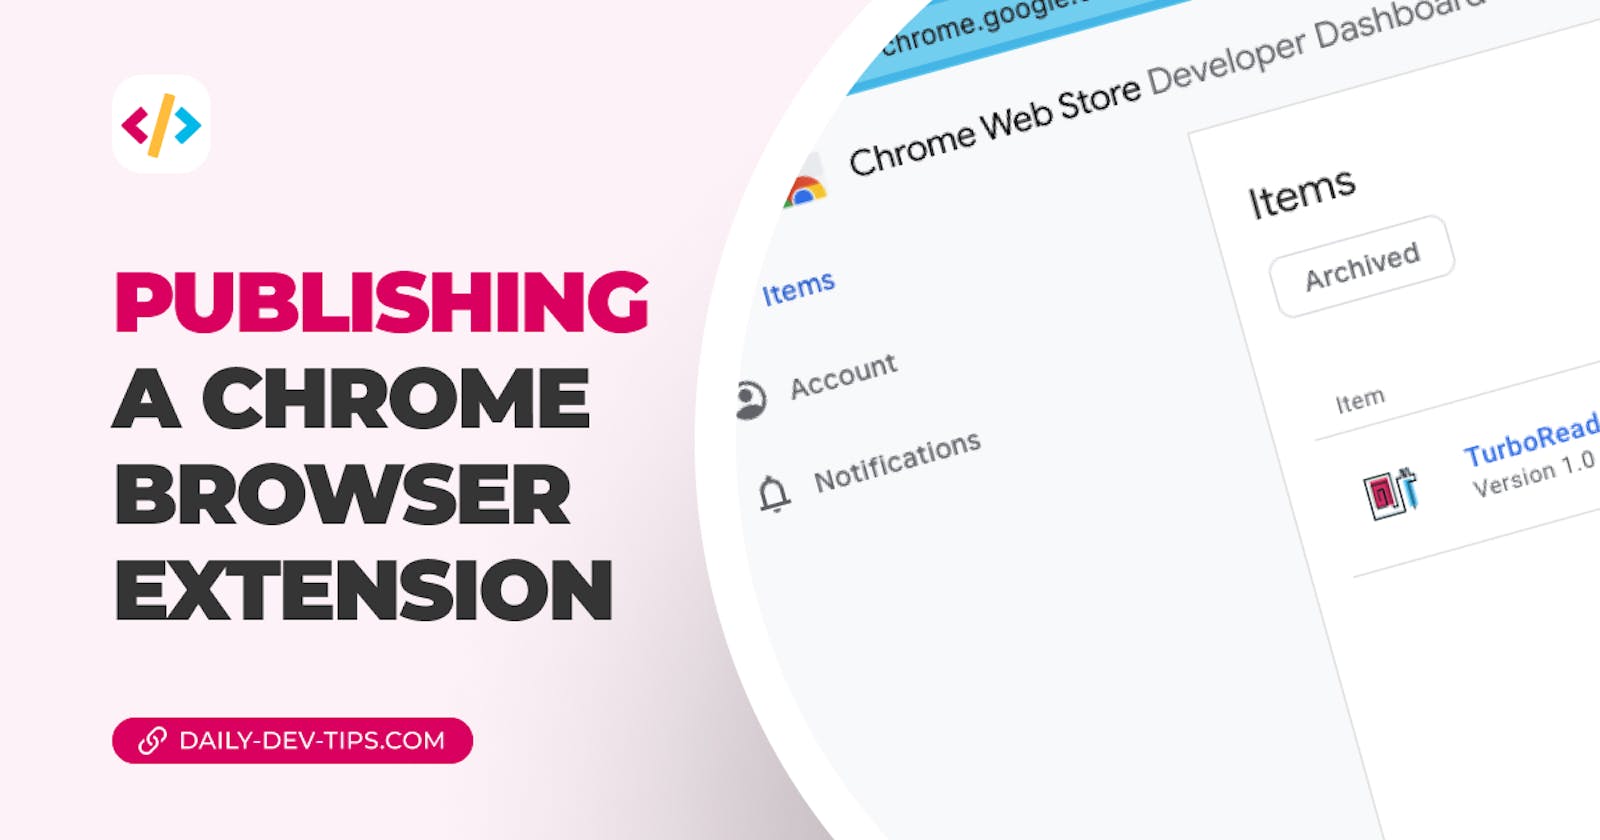 Publishing a Chrome browser extension